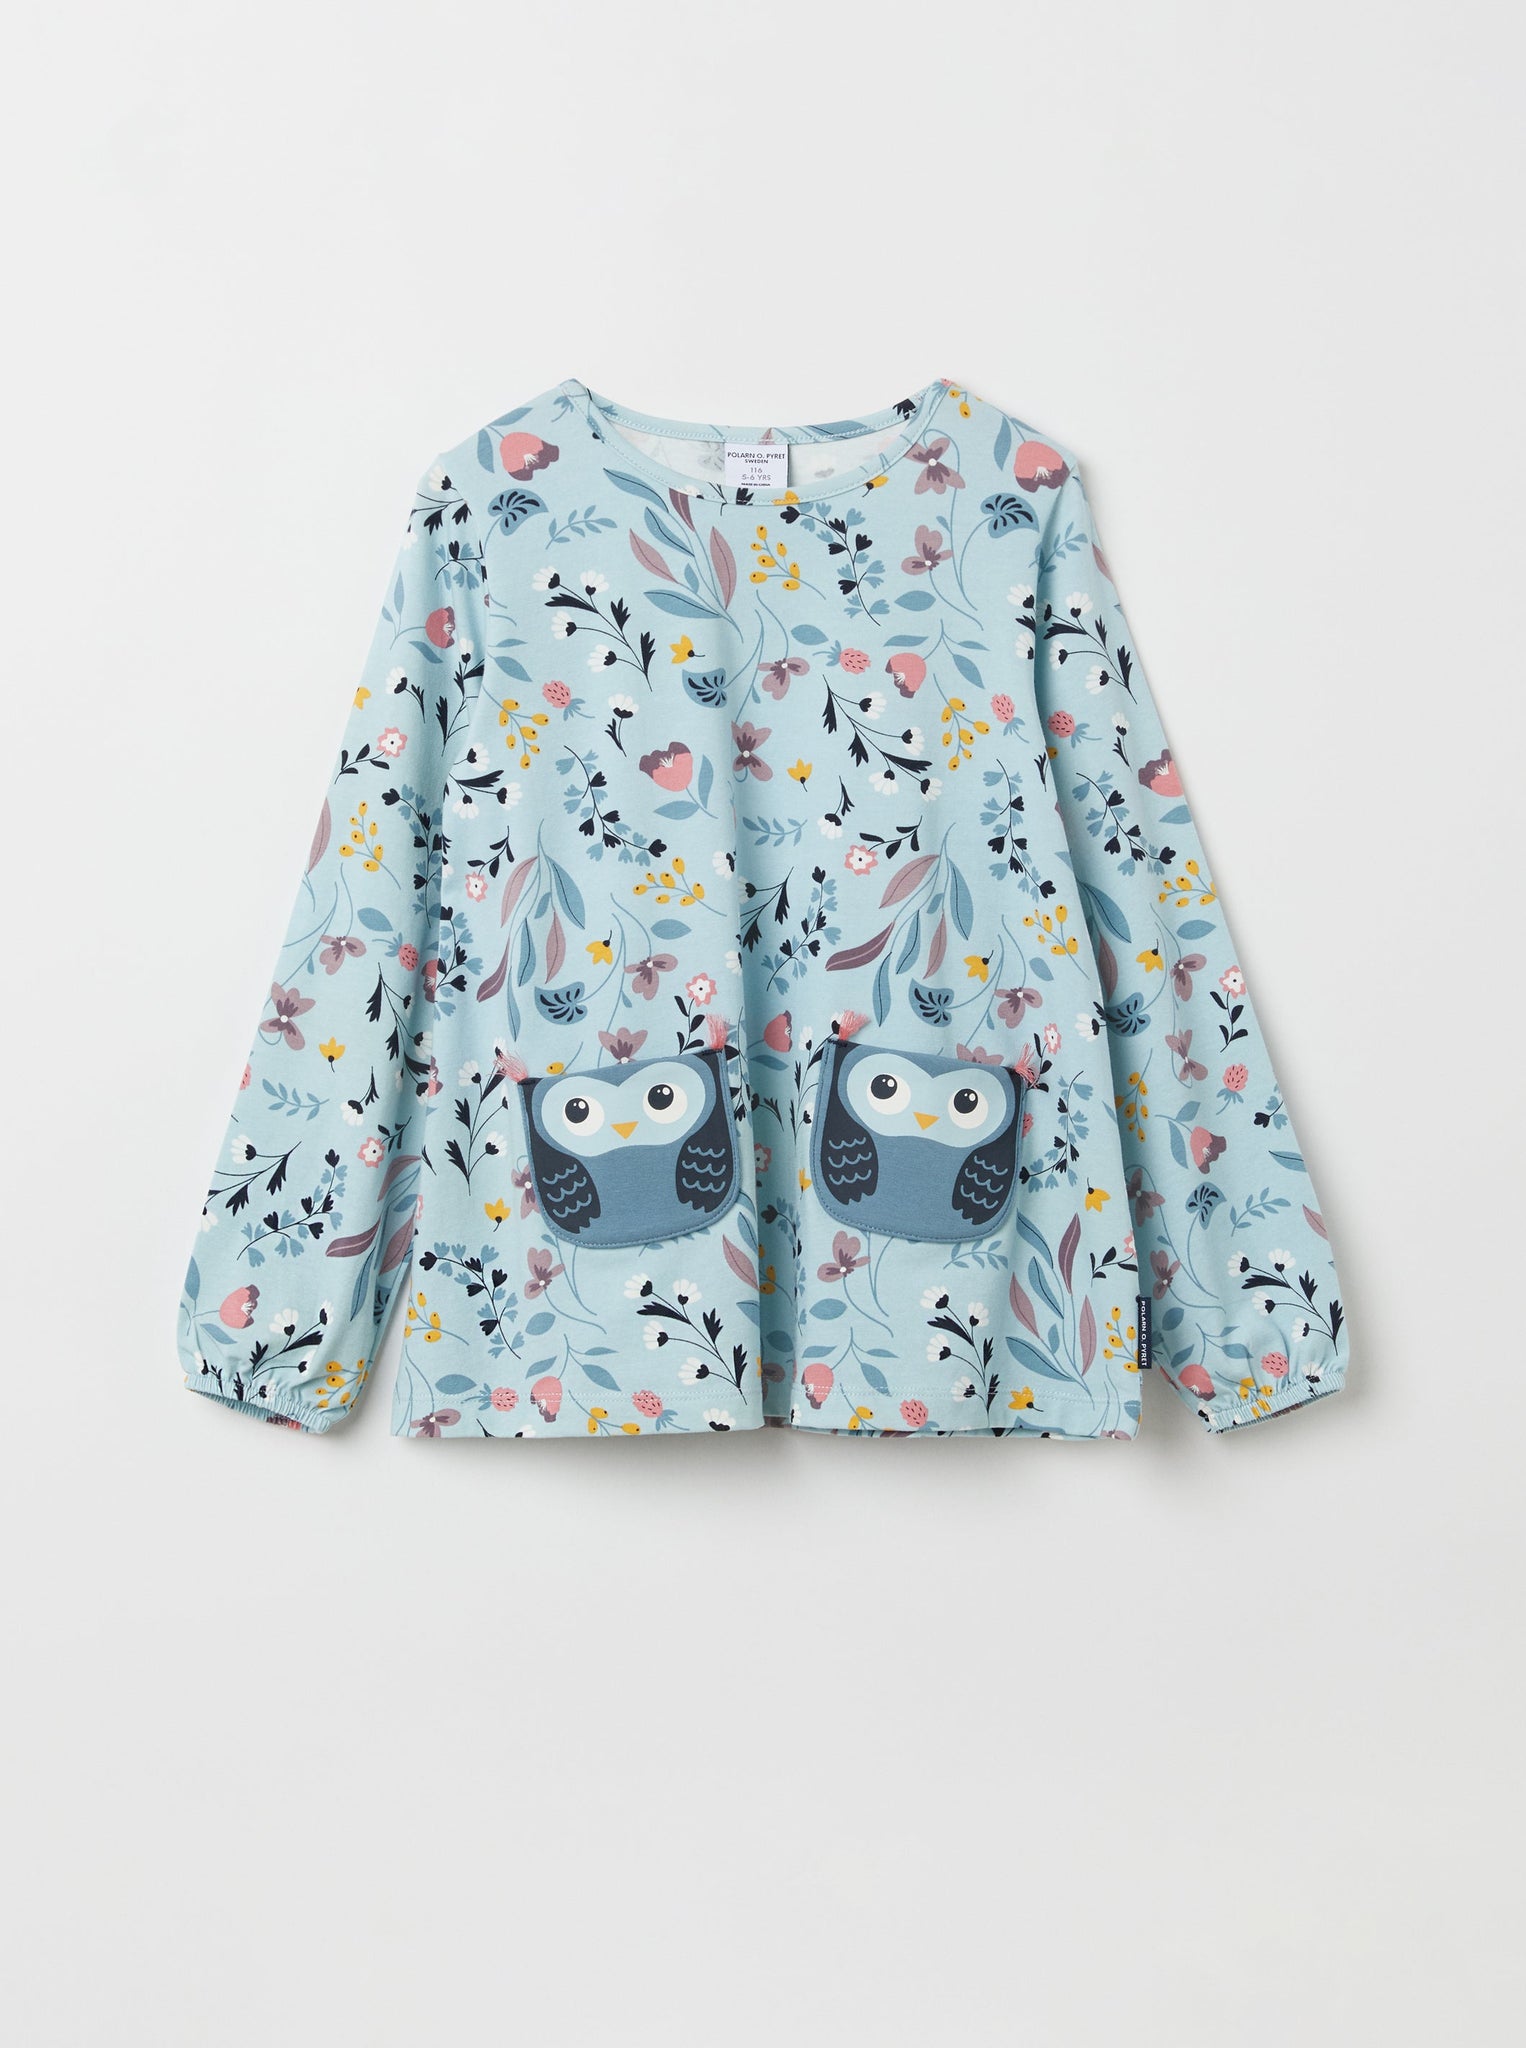 Organic Cotton Blue Floral Girls Top from the Polarn O. Pyret kidswear collection. Ethically produced kids clothing.